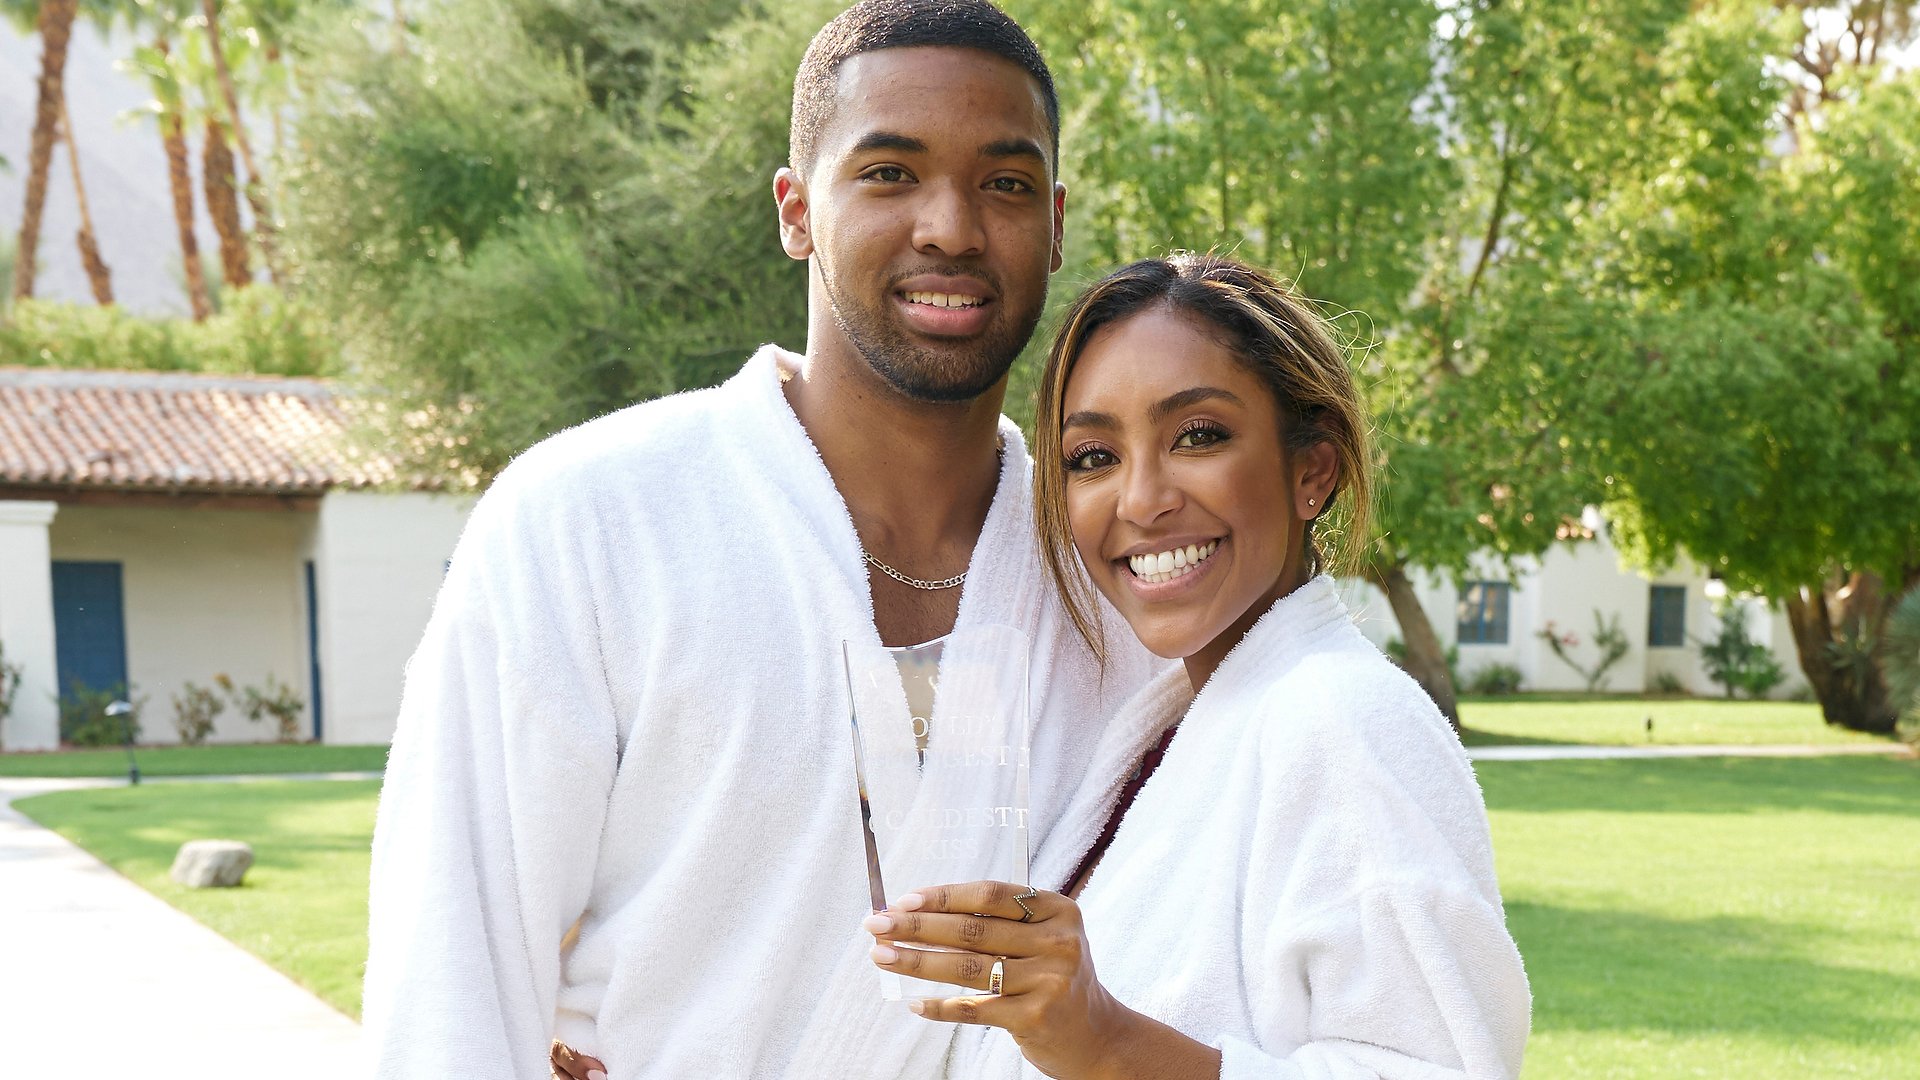 Ivan Hall and Tayshia Adams on their Fantasy Suite date on 'The Bachelorette' Season 16 Episode 12 finale on December 21, 2020